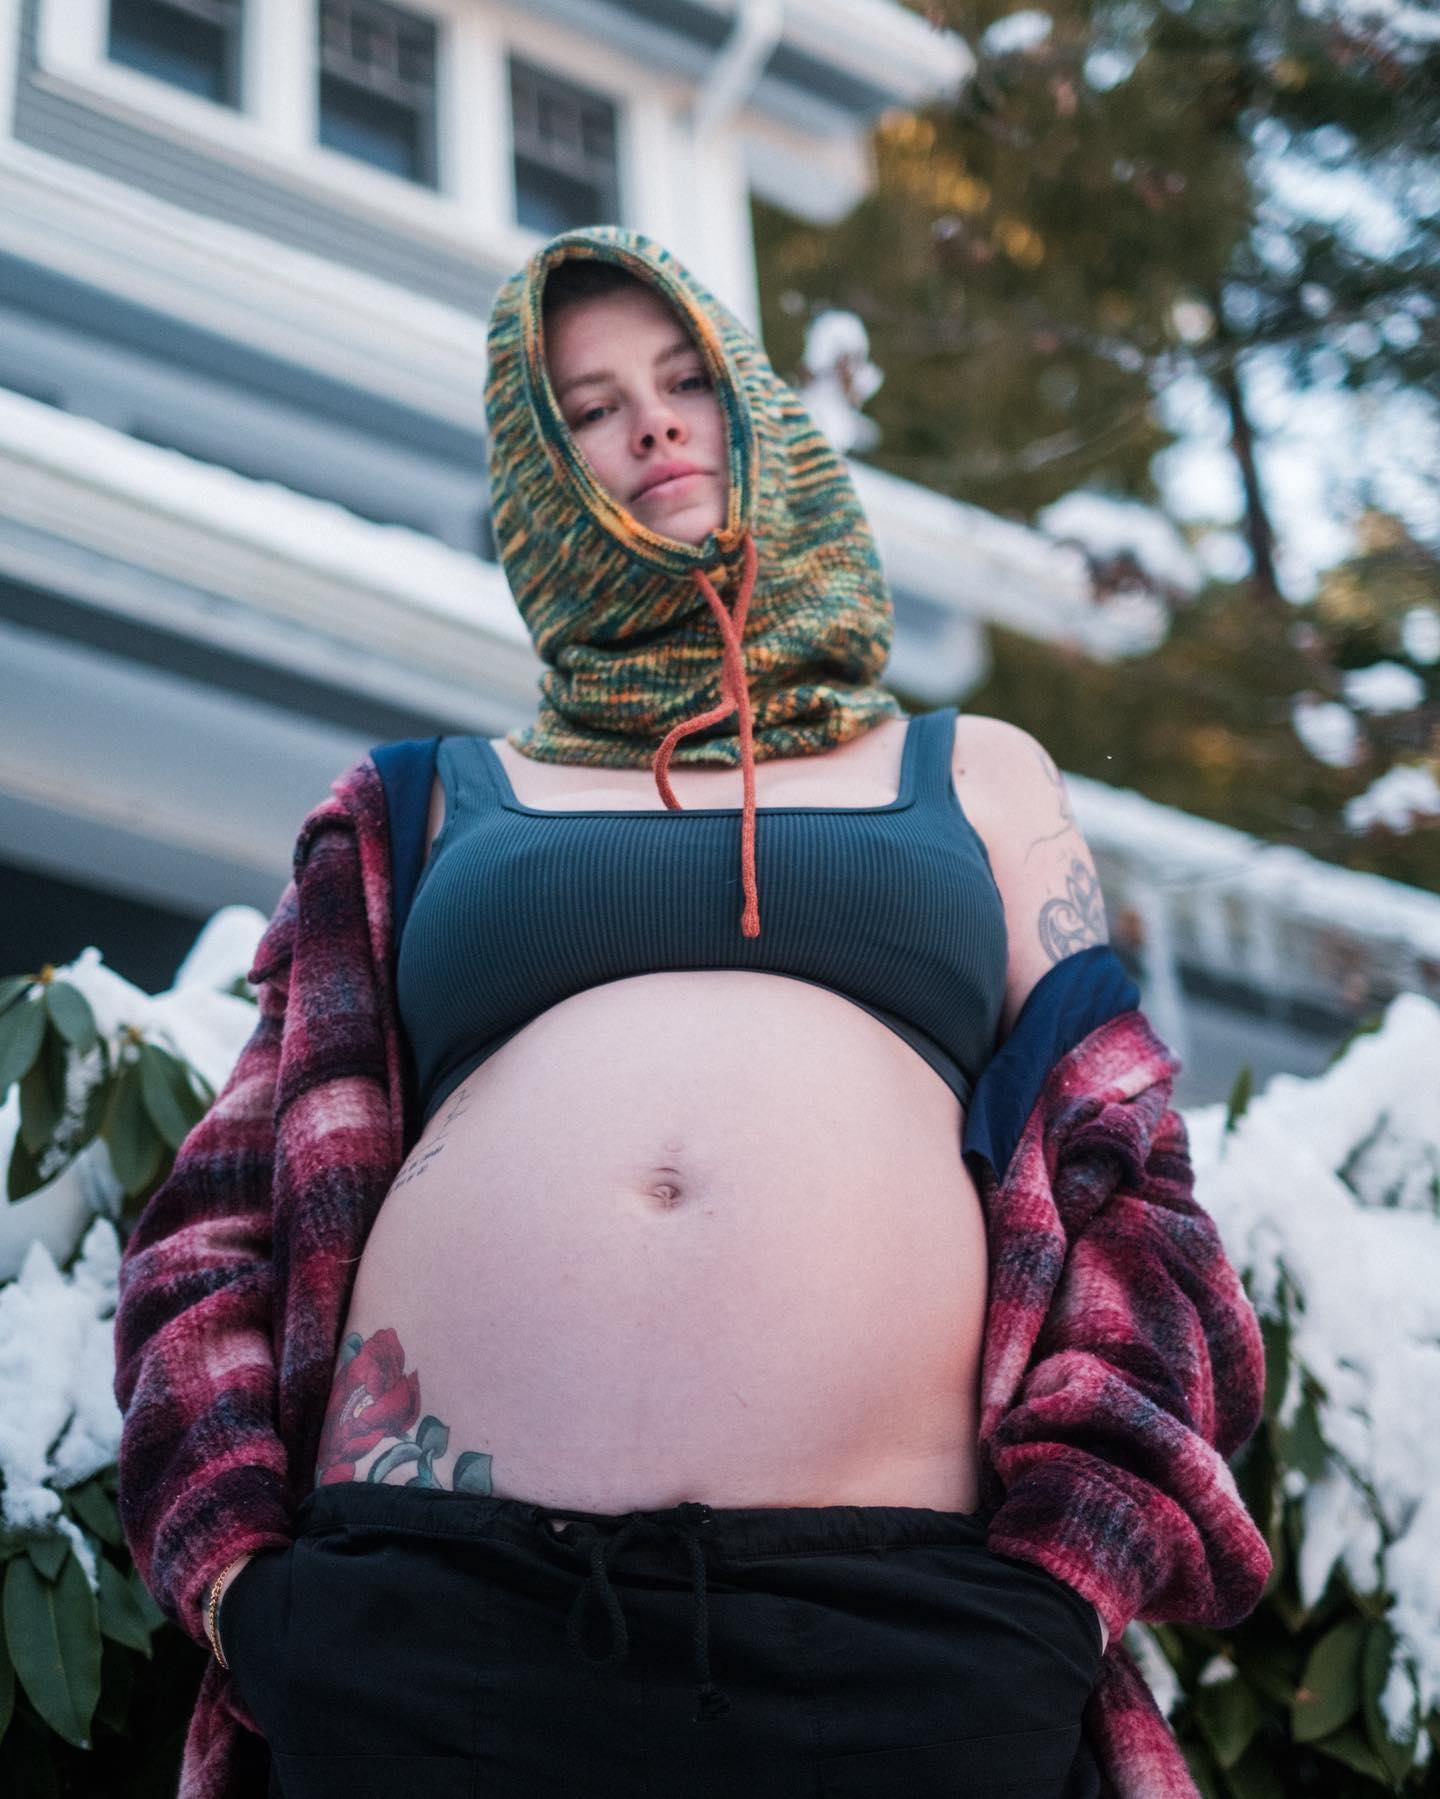 Ireland Baldwin jokes that she's in her "Rihanna belly out era" in the snow